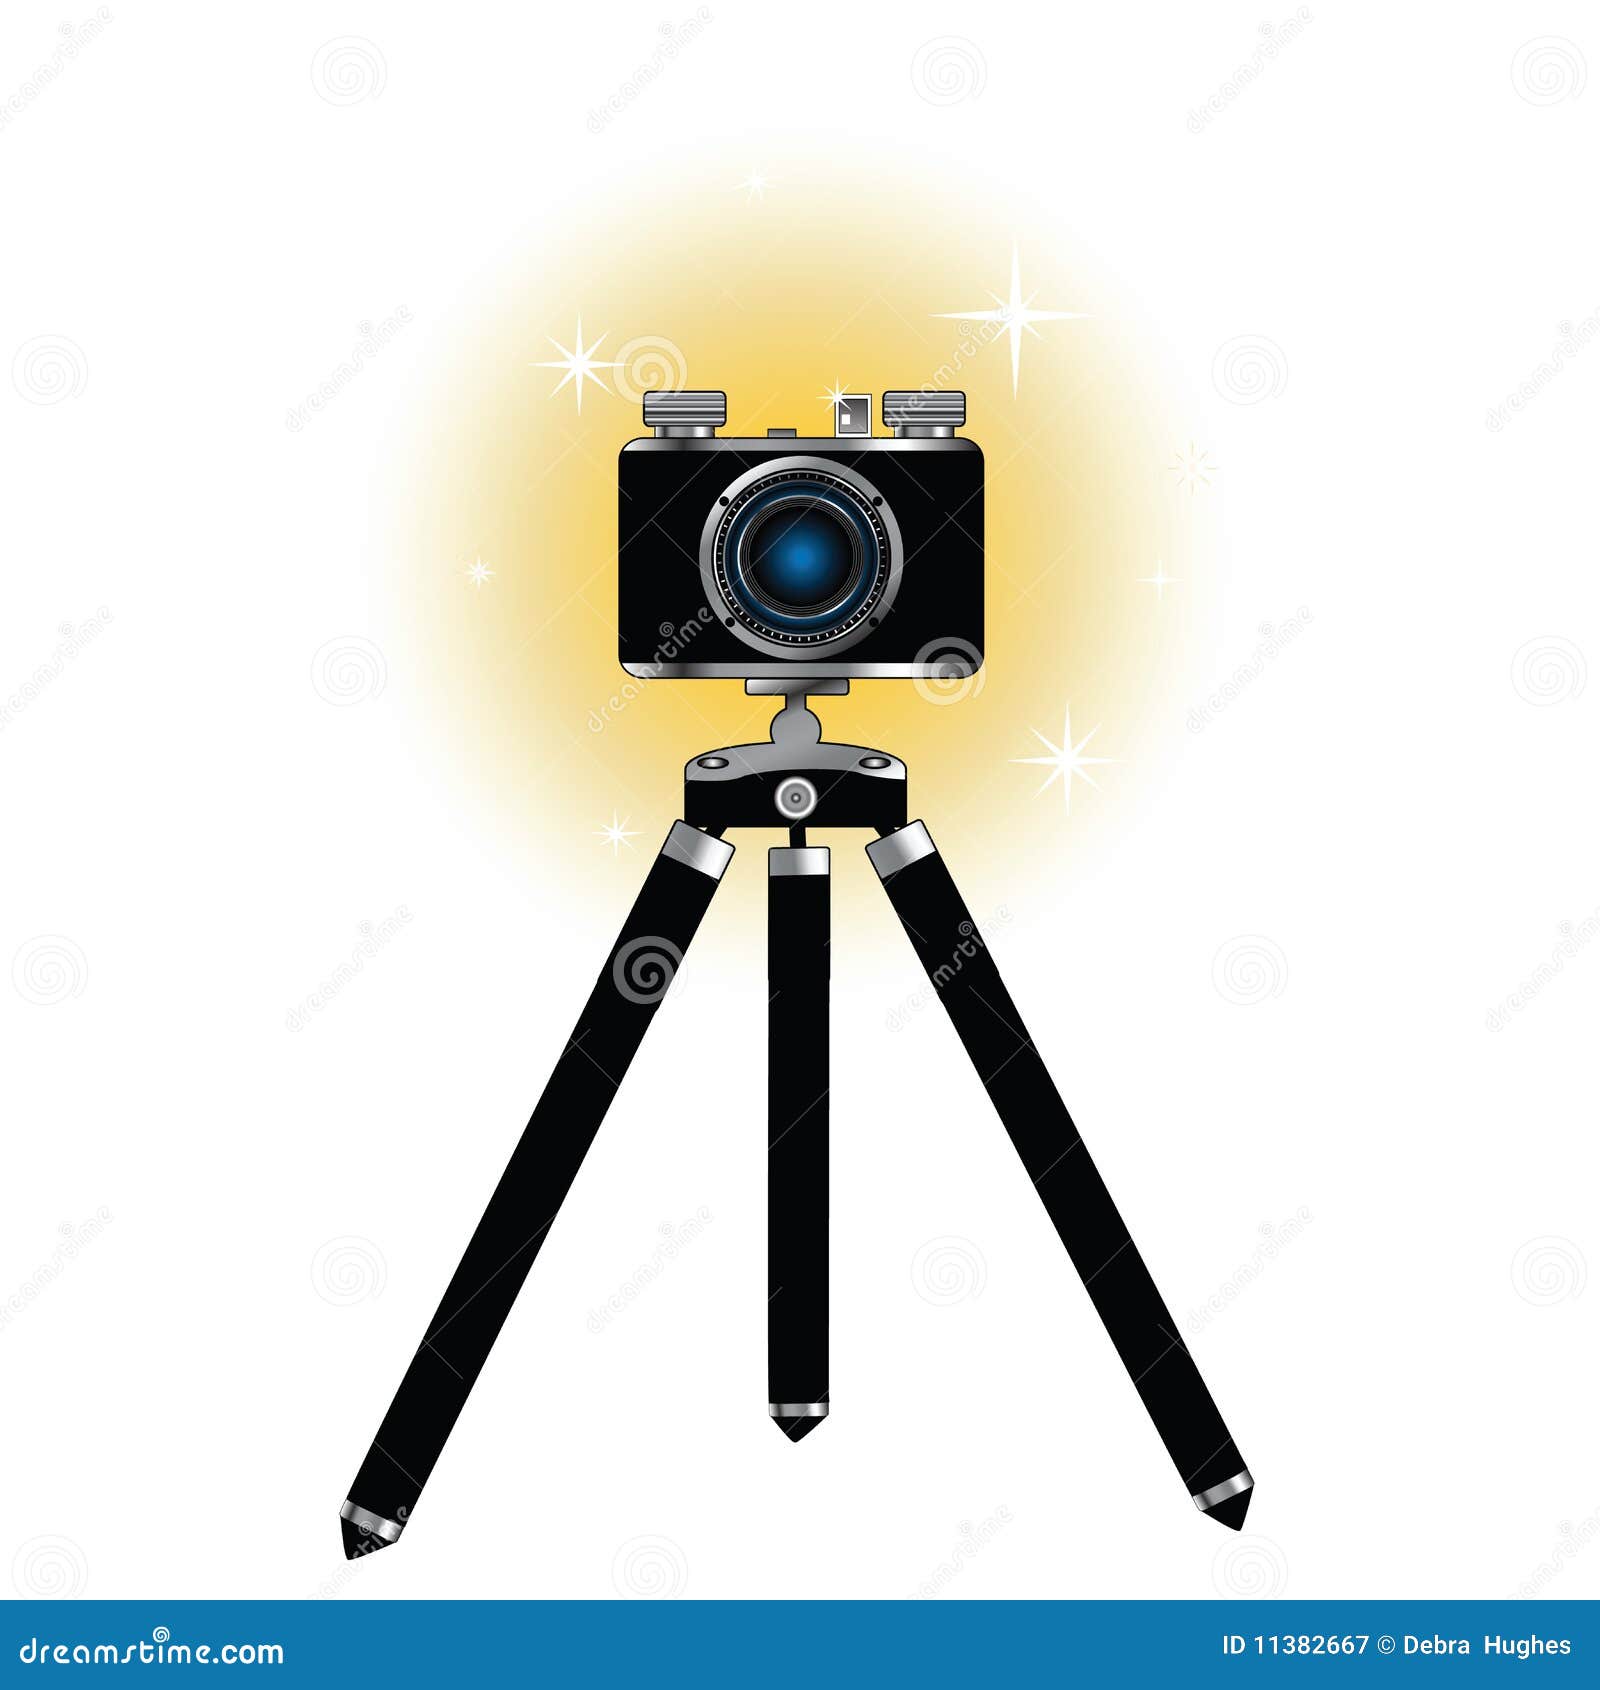 camera stand clipart - photo #26